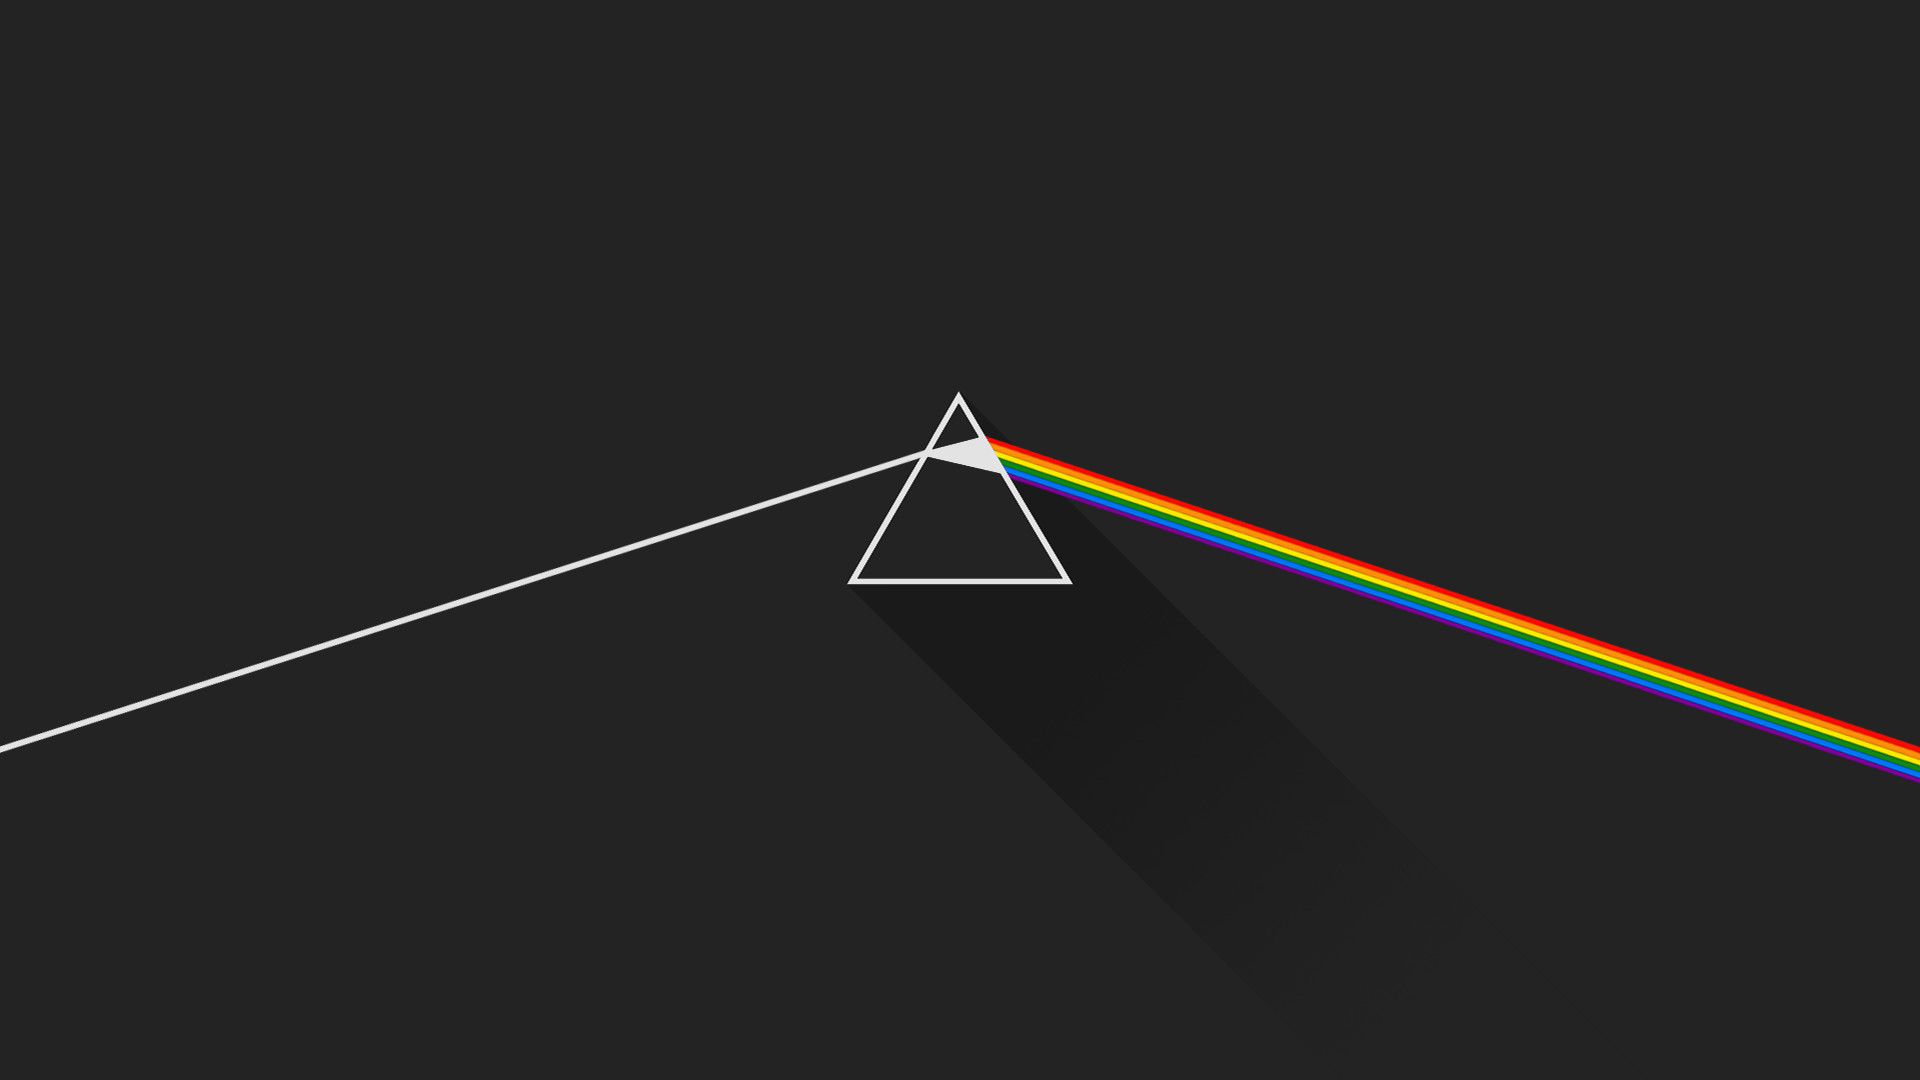 1920x1080 Download The Dark Side Of The Moon Wallpaper Gallery